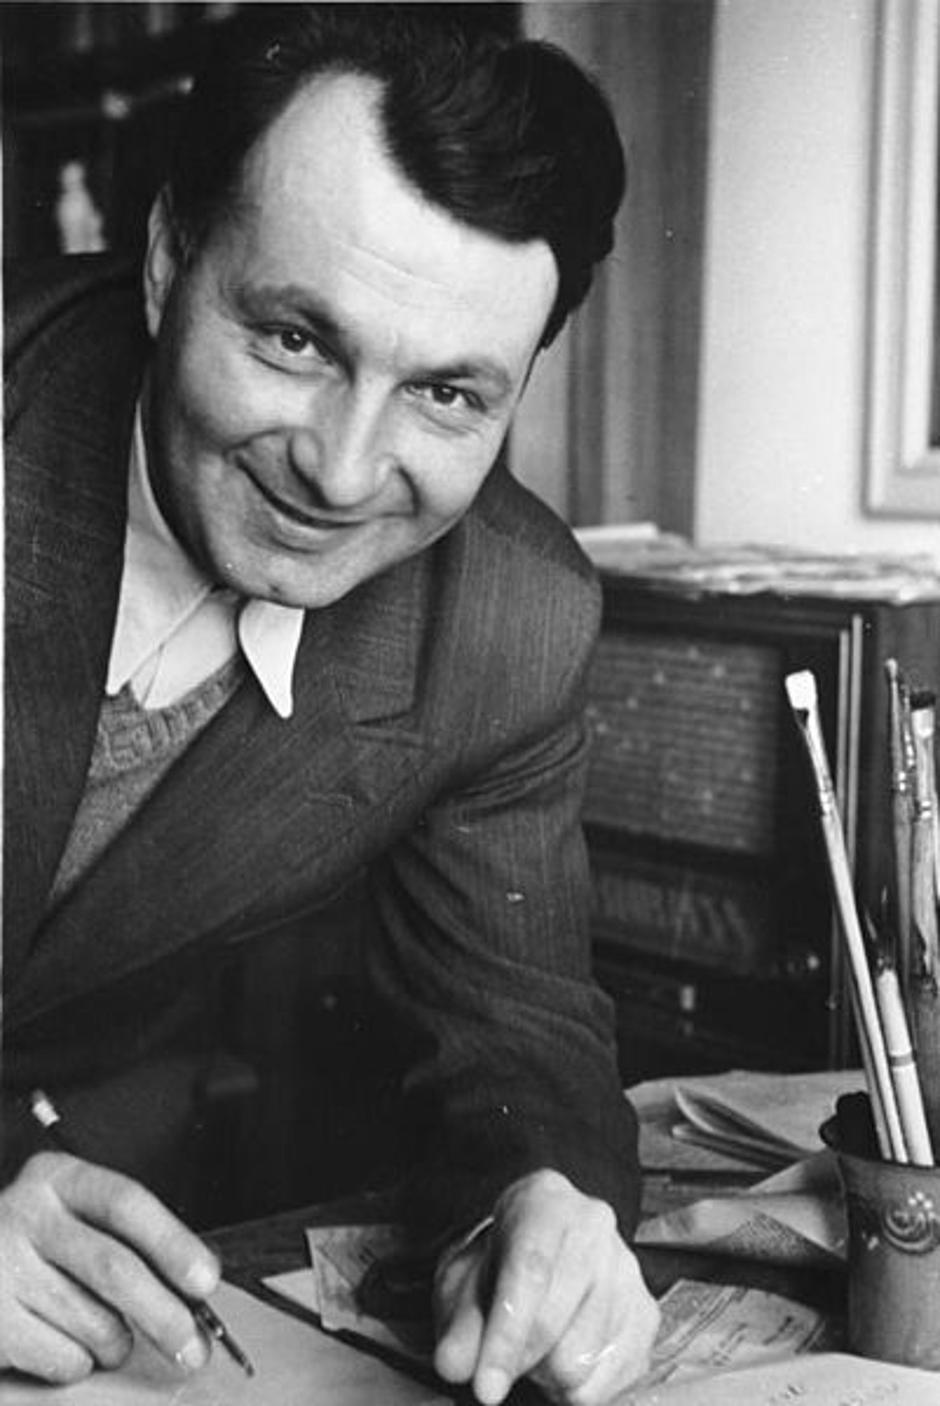 Erich Ohser | Author: Bundesarchiv/wikipedia commons